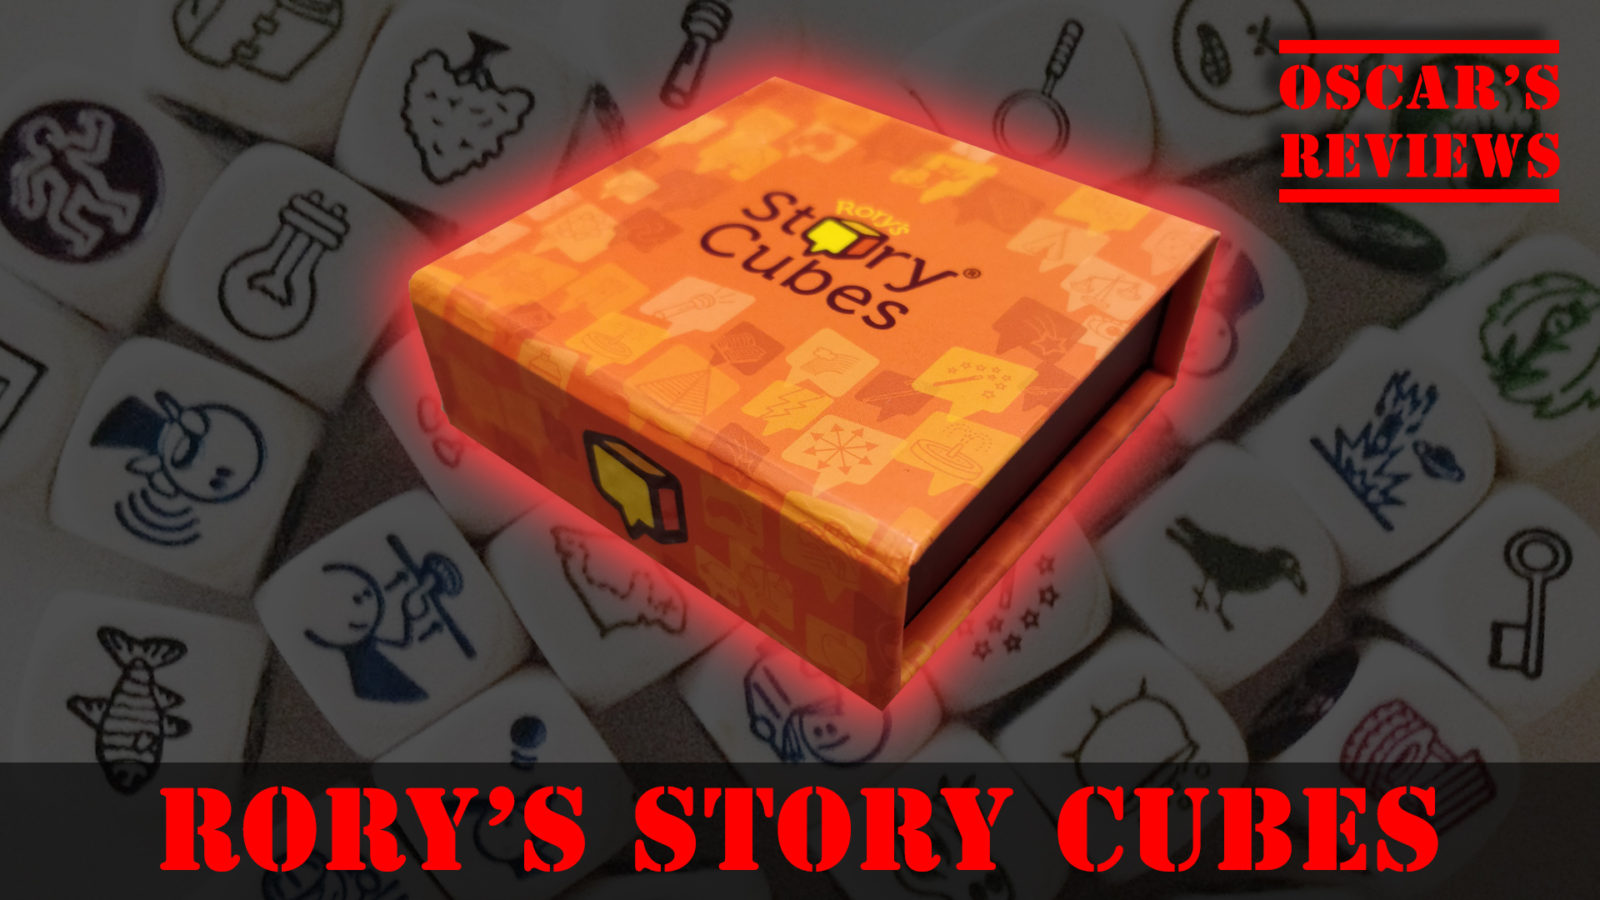 A Magical Lock-Picking Flying Postman?! It Must be Rory’s Story Cubes!